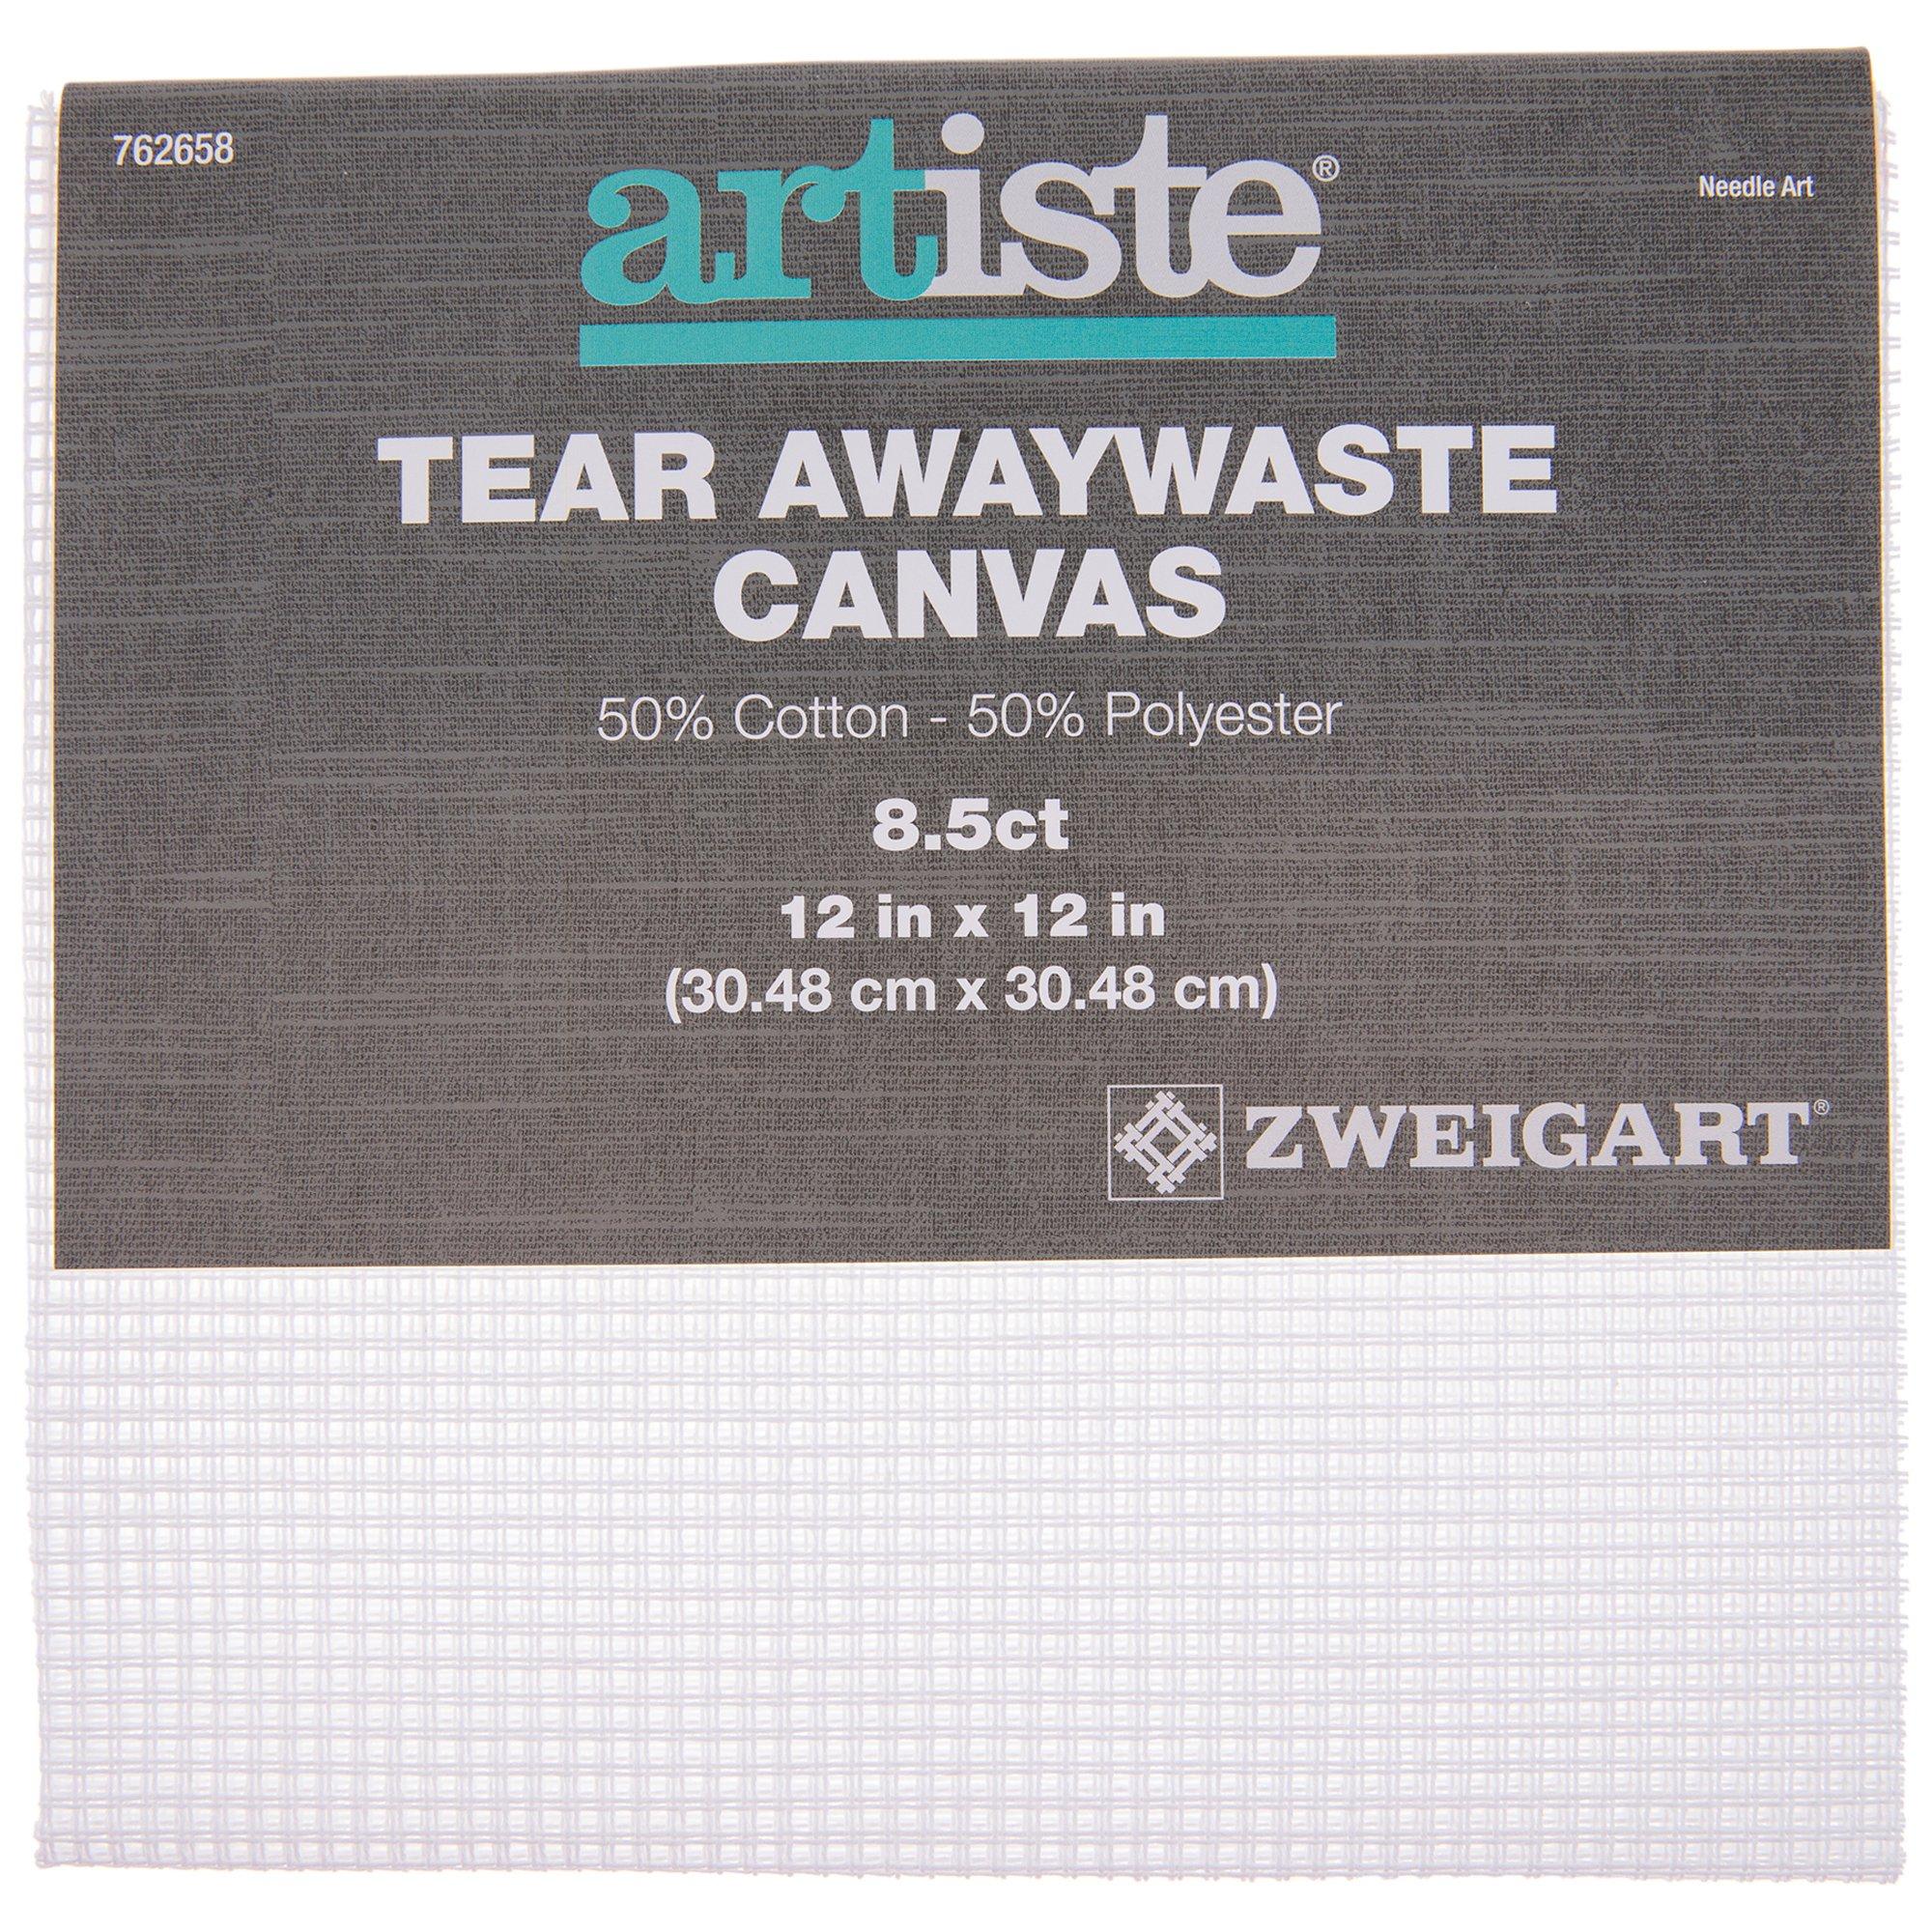 Waste Canvas Cross Stitch Fabrics for sale, Shop with Afterpay